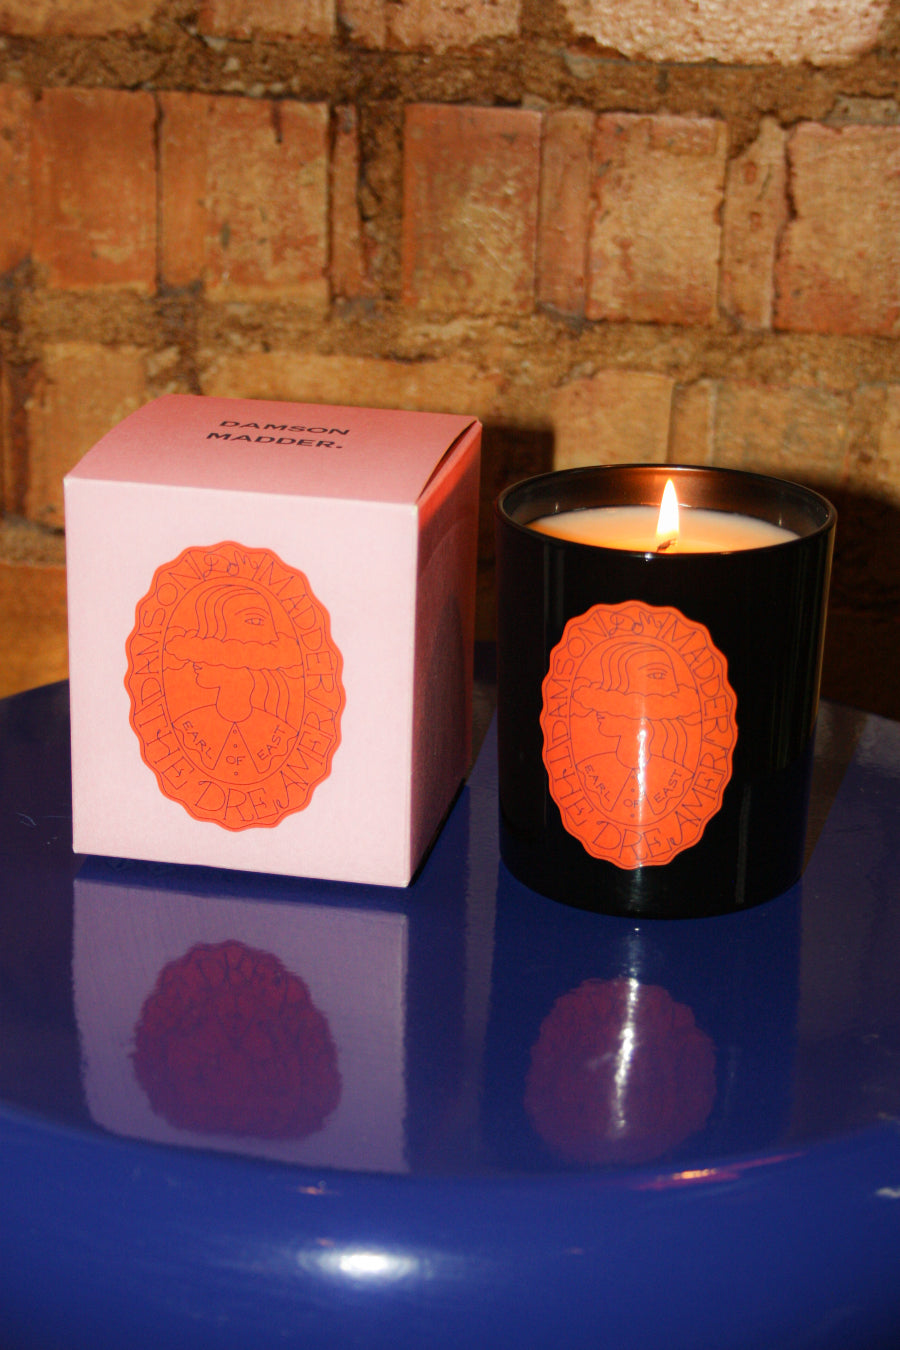 earl of east x damson madder candle - the dreamer